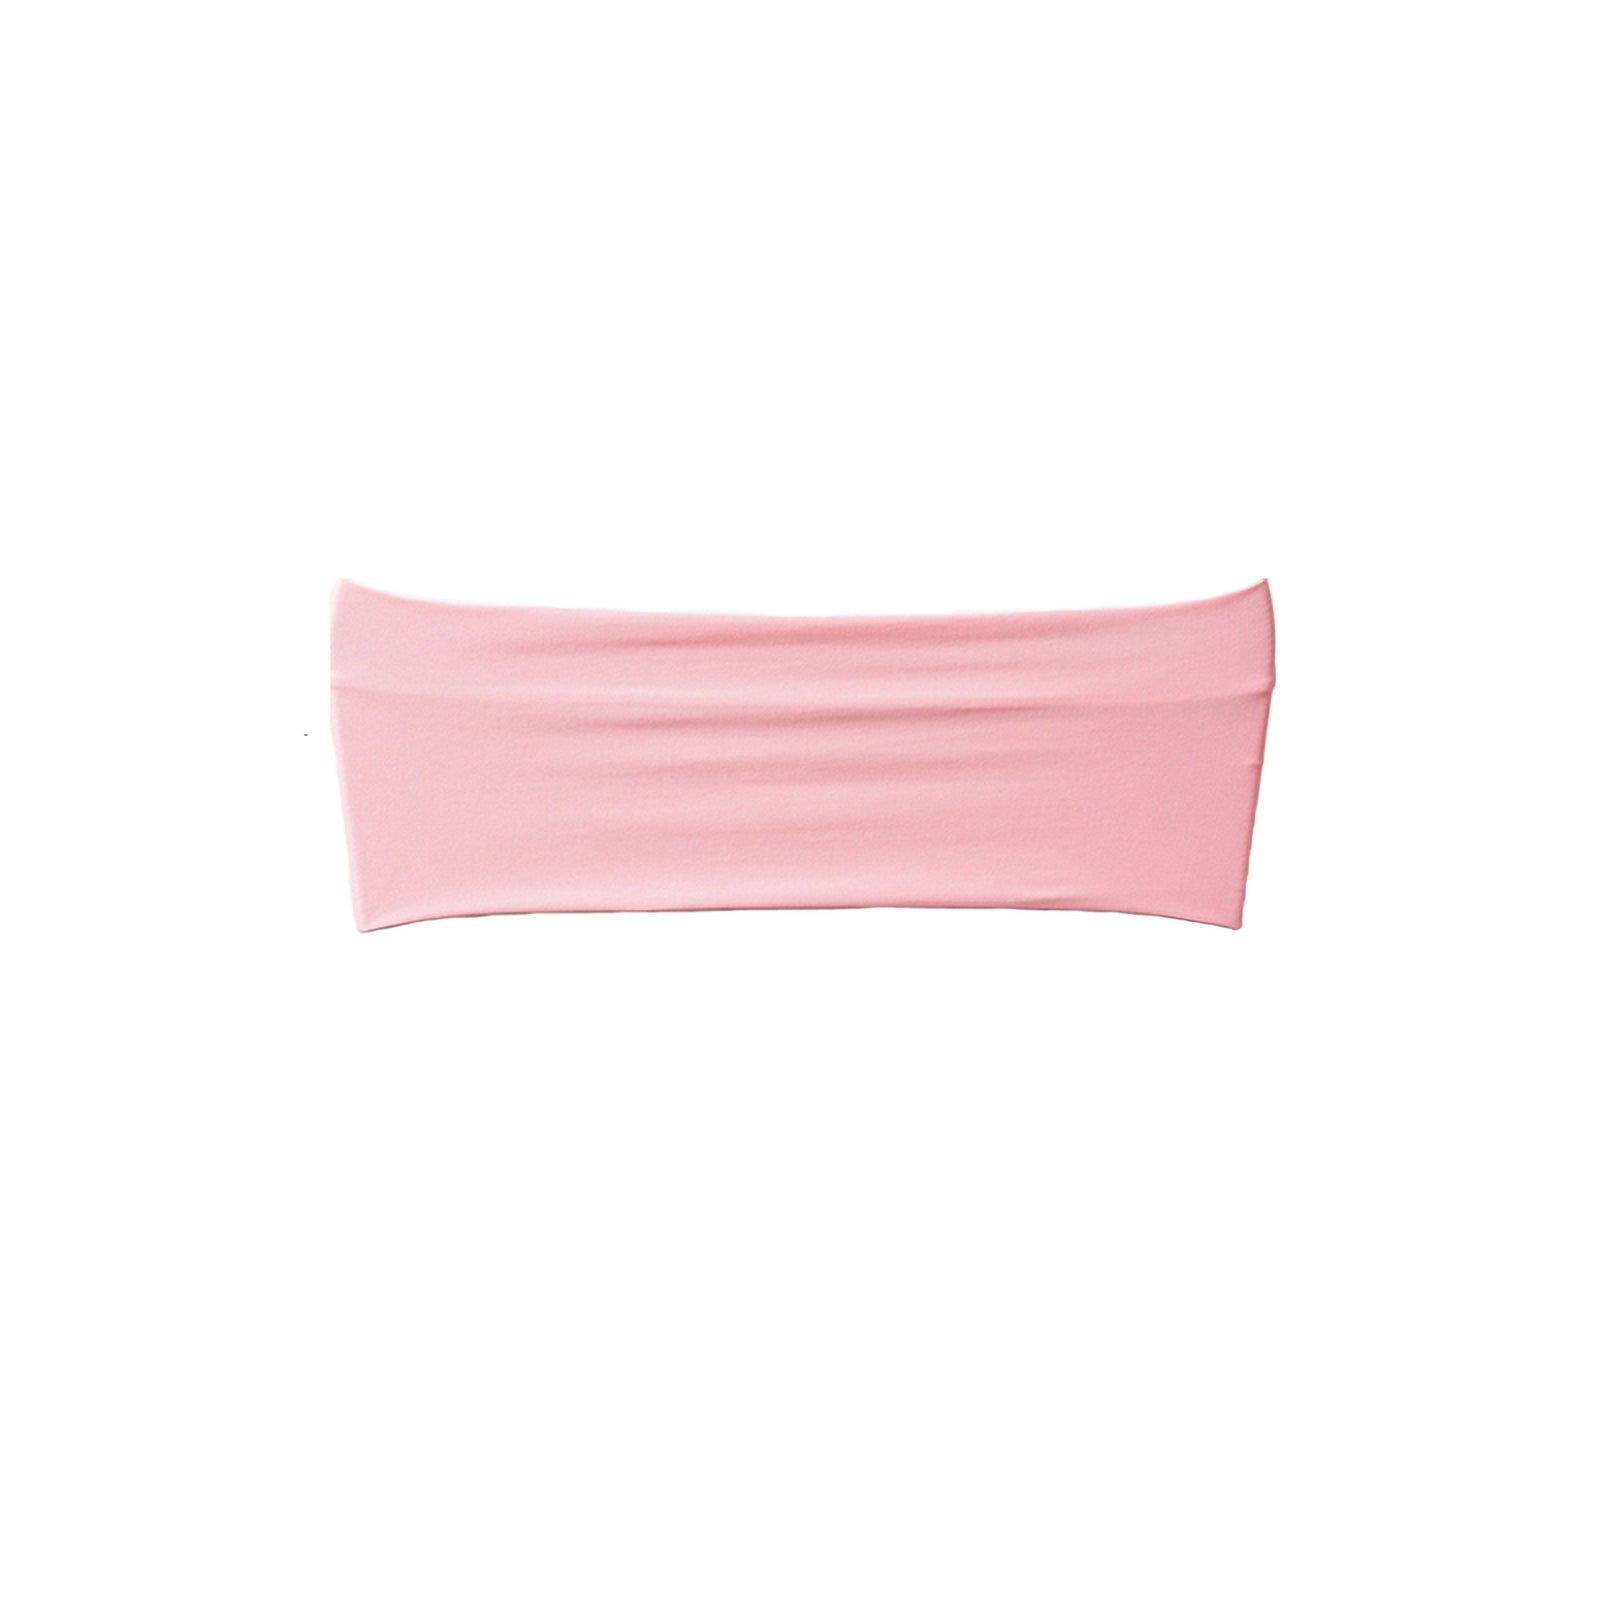 5-Pack Pink Spandex Chair Sashes | eFavormart.com